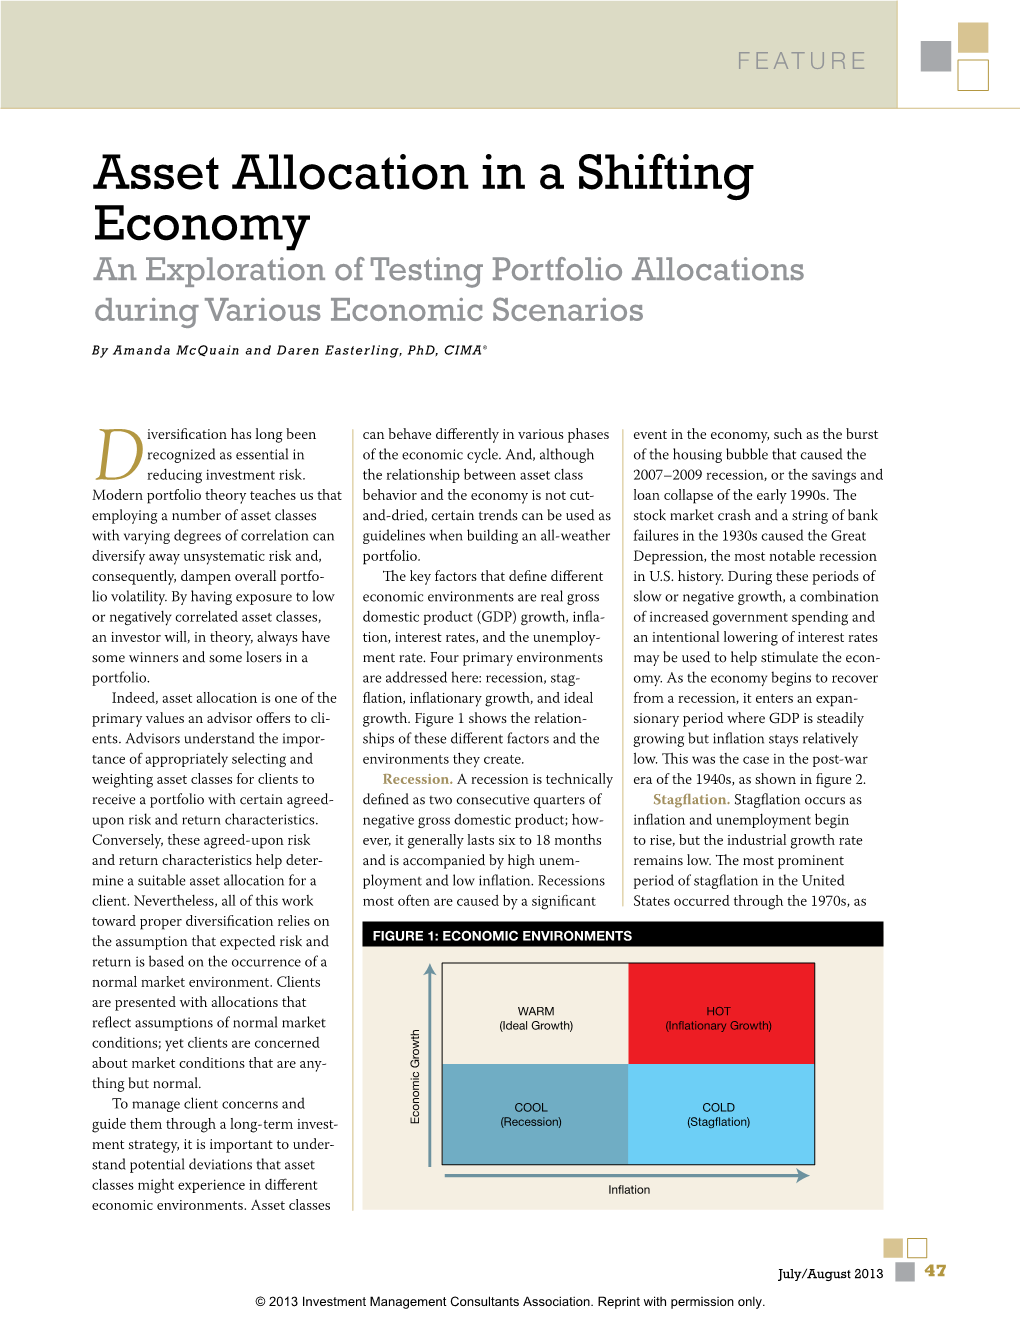 Asset Allocation in a Shifting Economy an Exploration of Testing Portfolio Allocations During Various Economic Scenarios